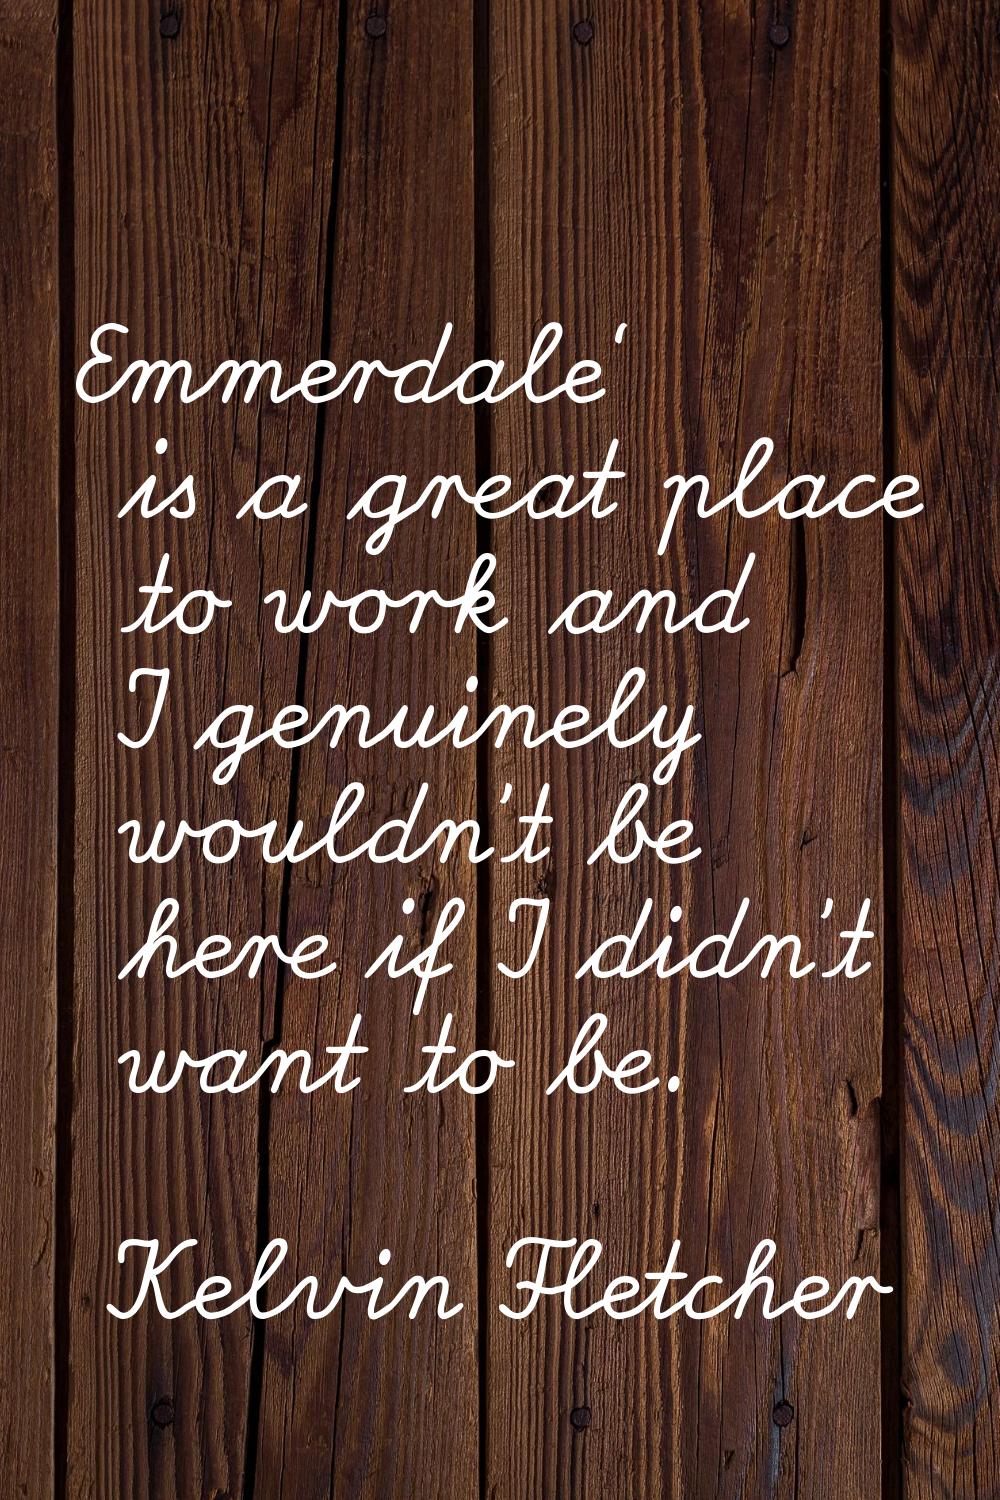 Emmerdale' is a great place to work and I genuinely wouldn't be here if I didn't want to be.